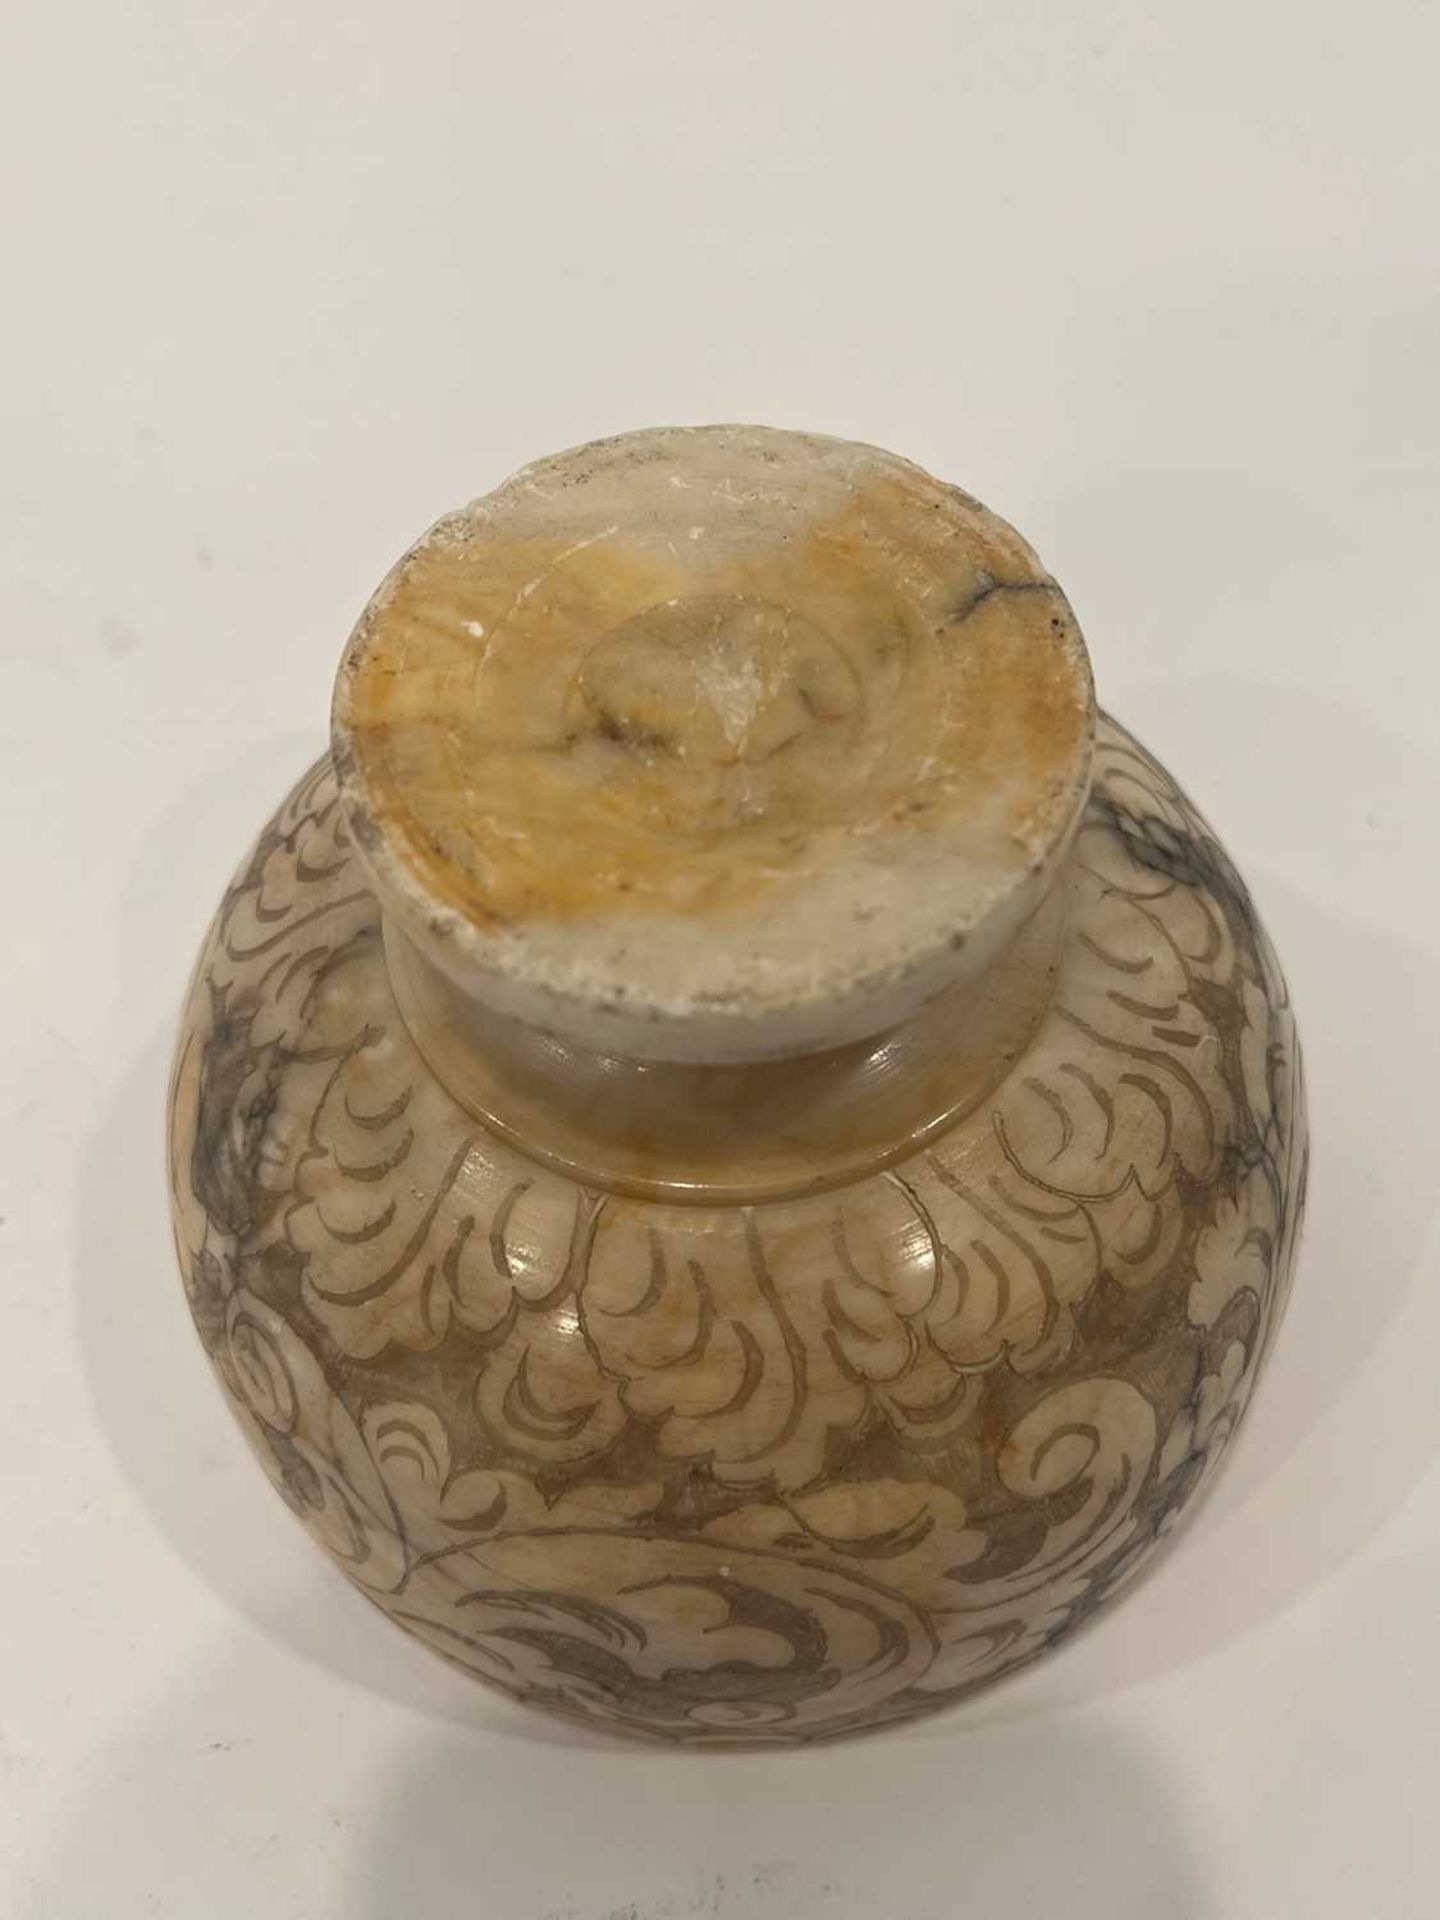 AN 18TH / 19TH CENTURY ITALIAN CARVED ALABASTER BOWL - Image 2 of 6